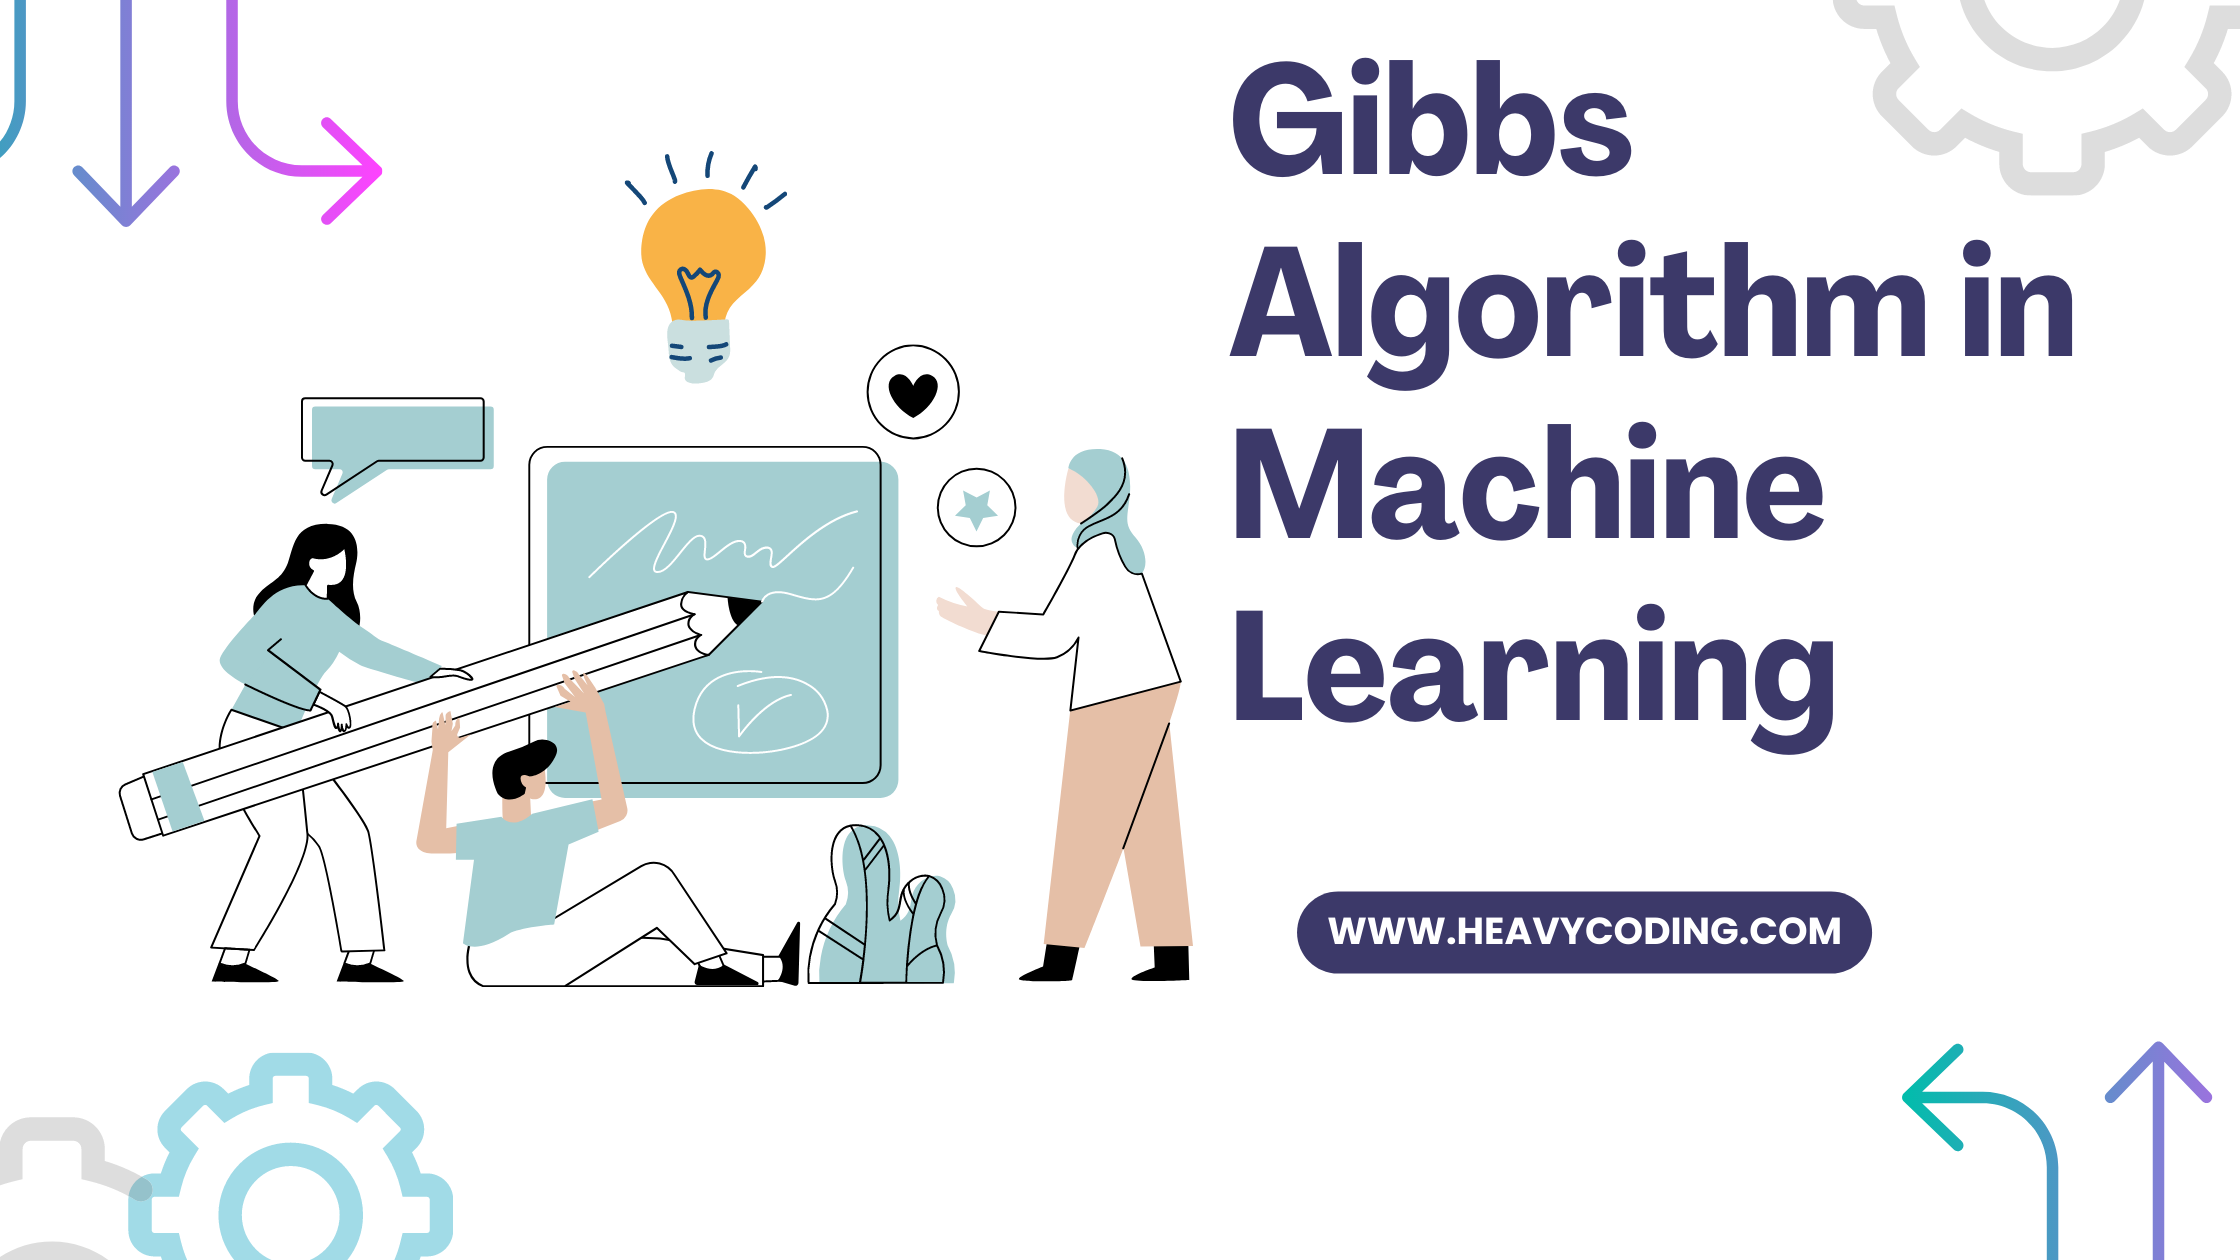 You are currently viewing Gibbs Algorithm in Machine Learning